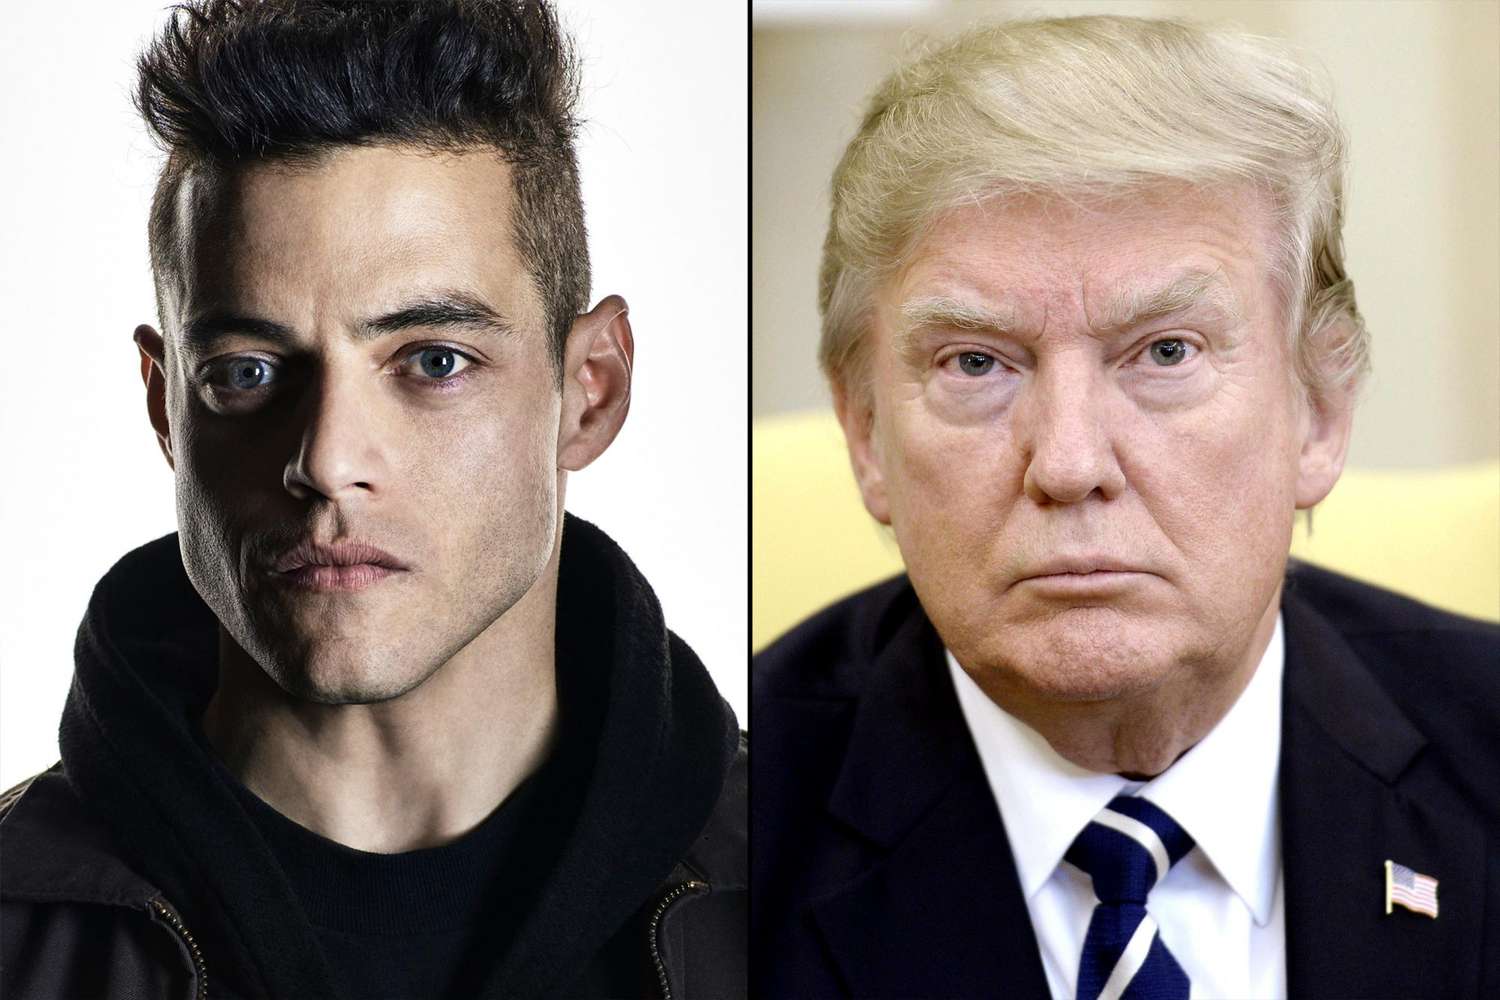 væske subtropisk hånd Mr. Robot has insane and accurate theories about the rise of Trump | EW.com